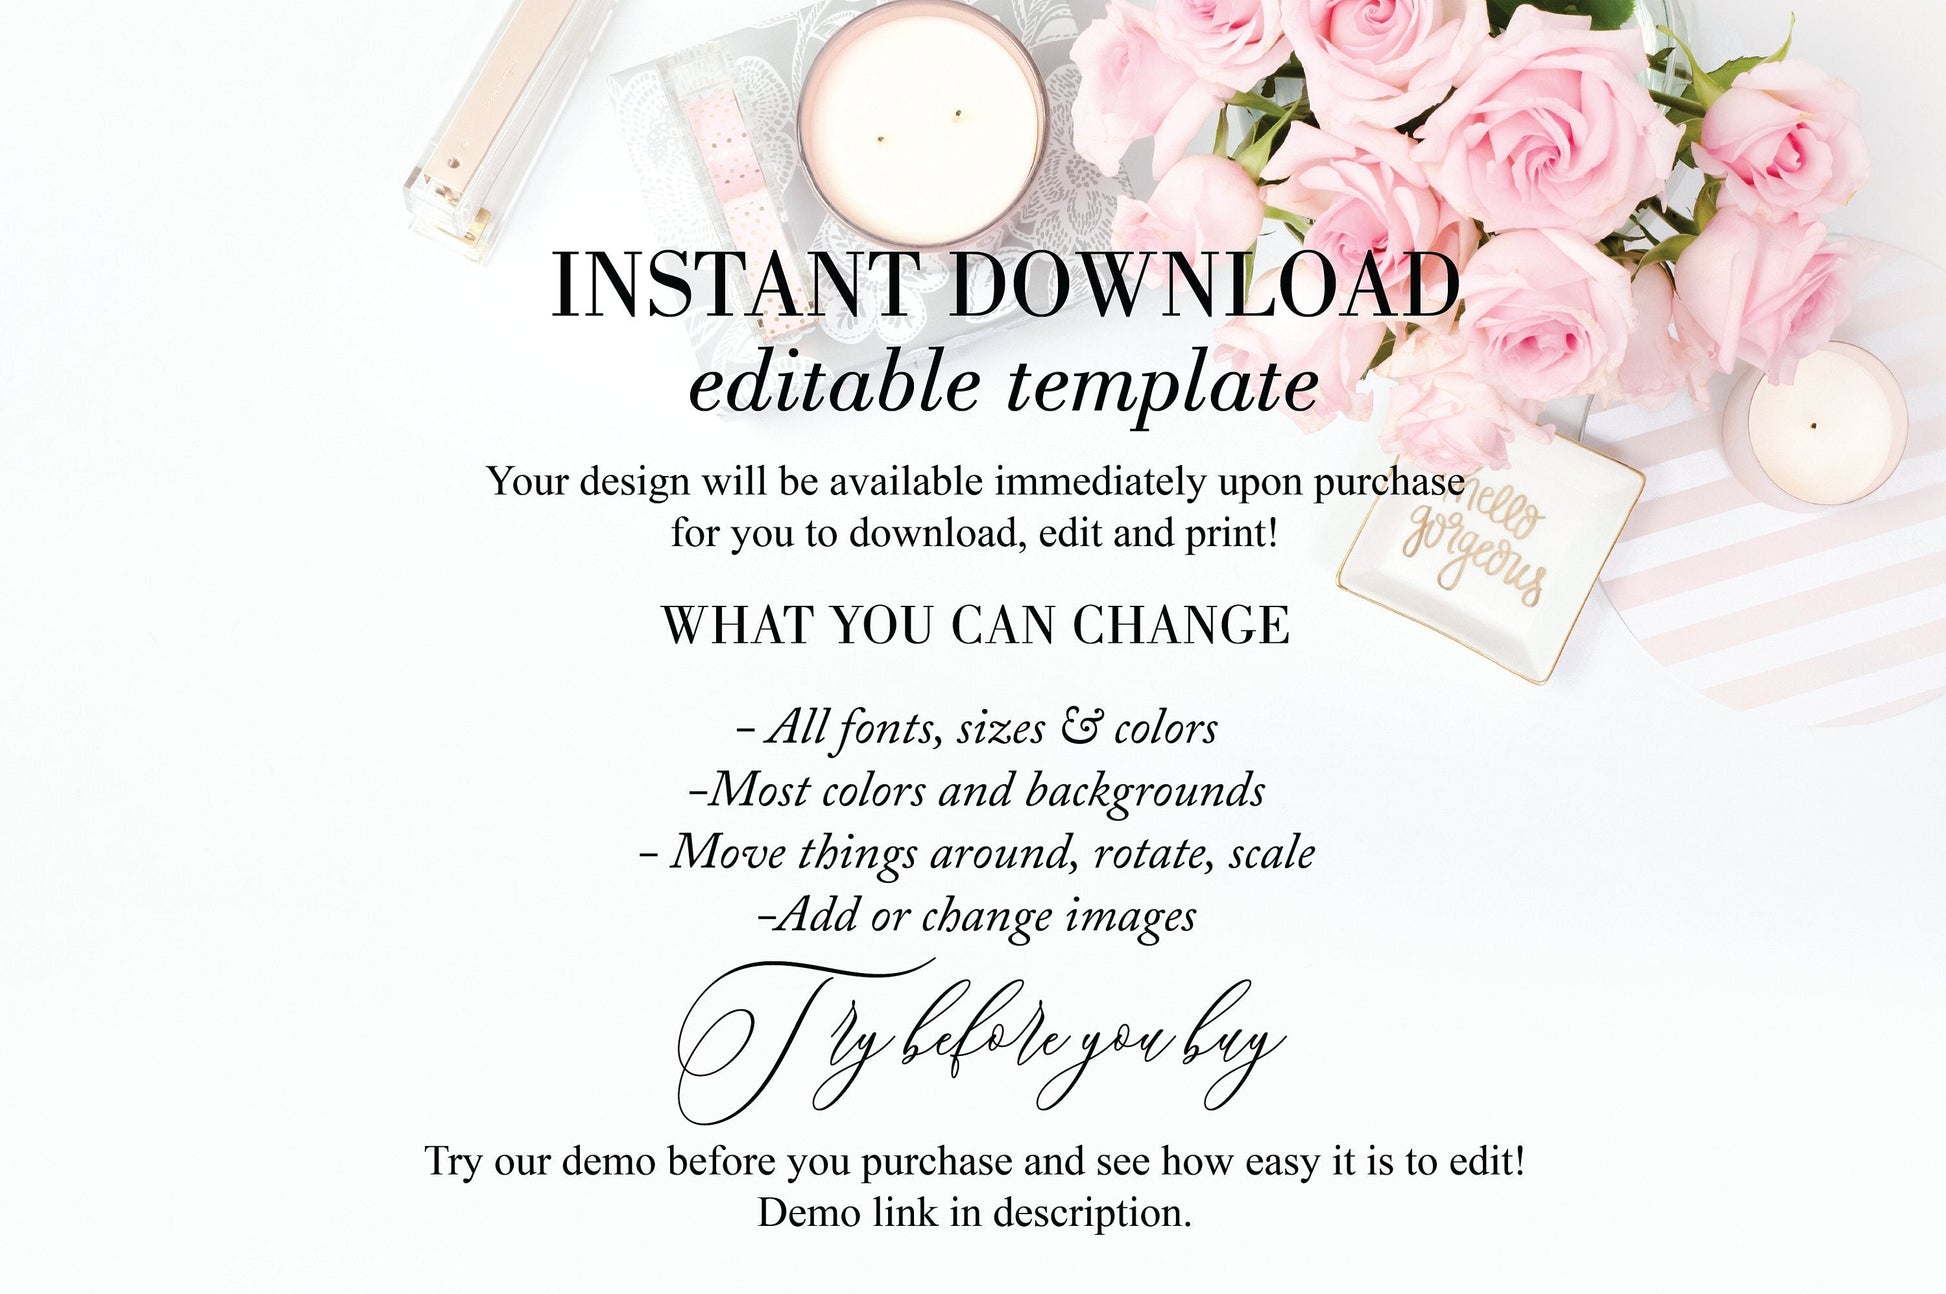 Printable  Bridal Shower Welcome Sign Template Editable Instant Download Wedding Décor - Grace SHOWER/BACH SIGNS SAVVY PAPER CO